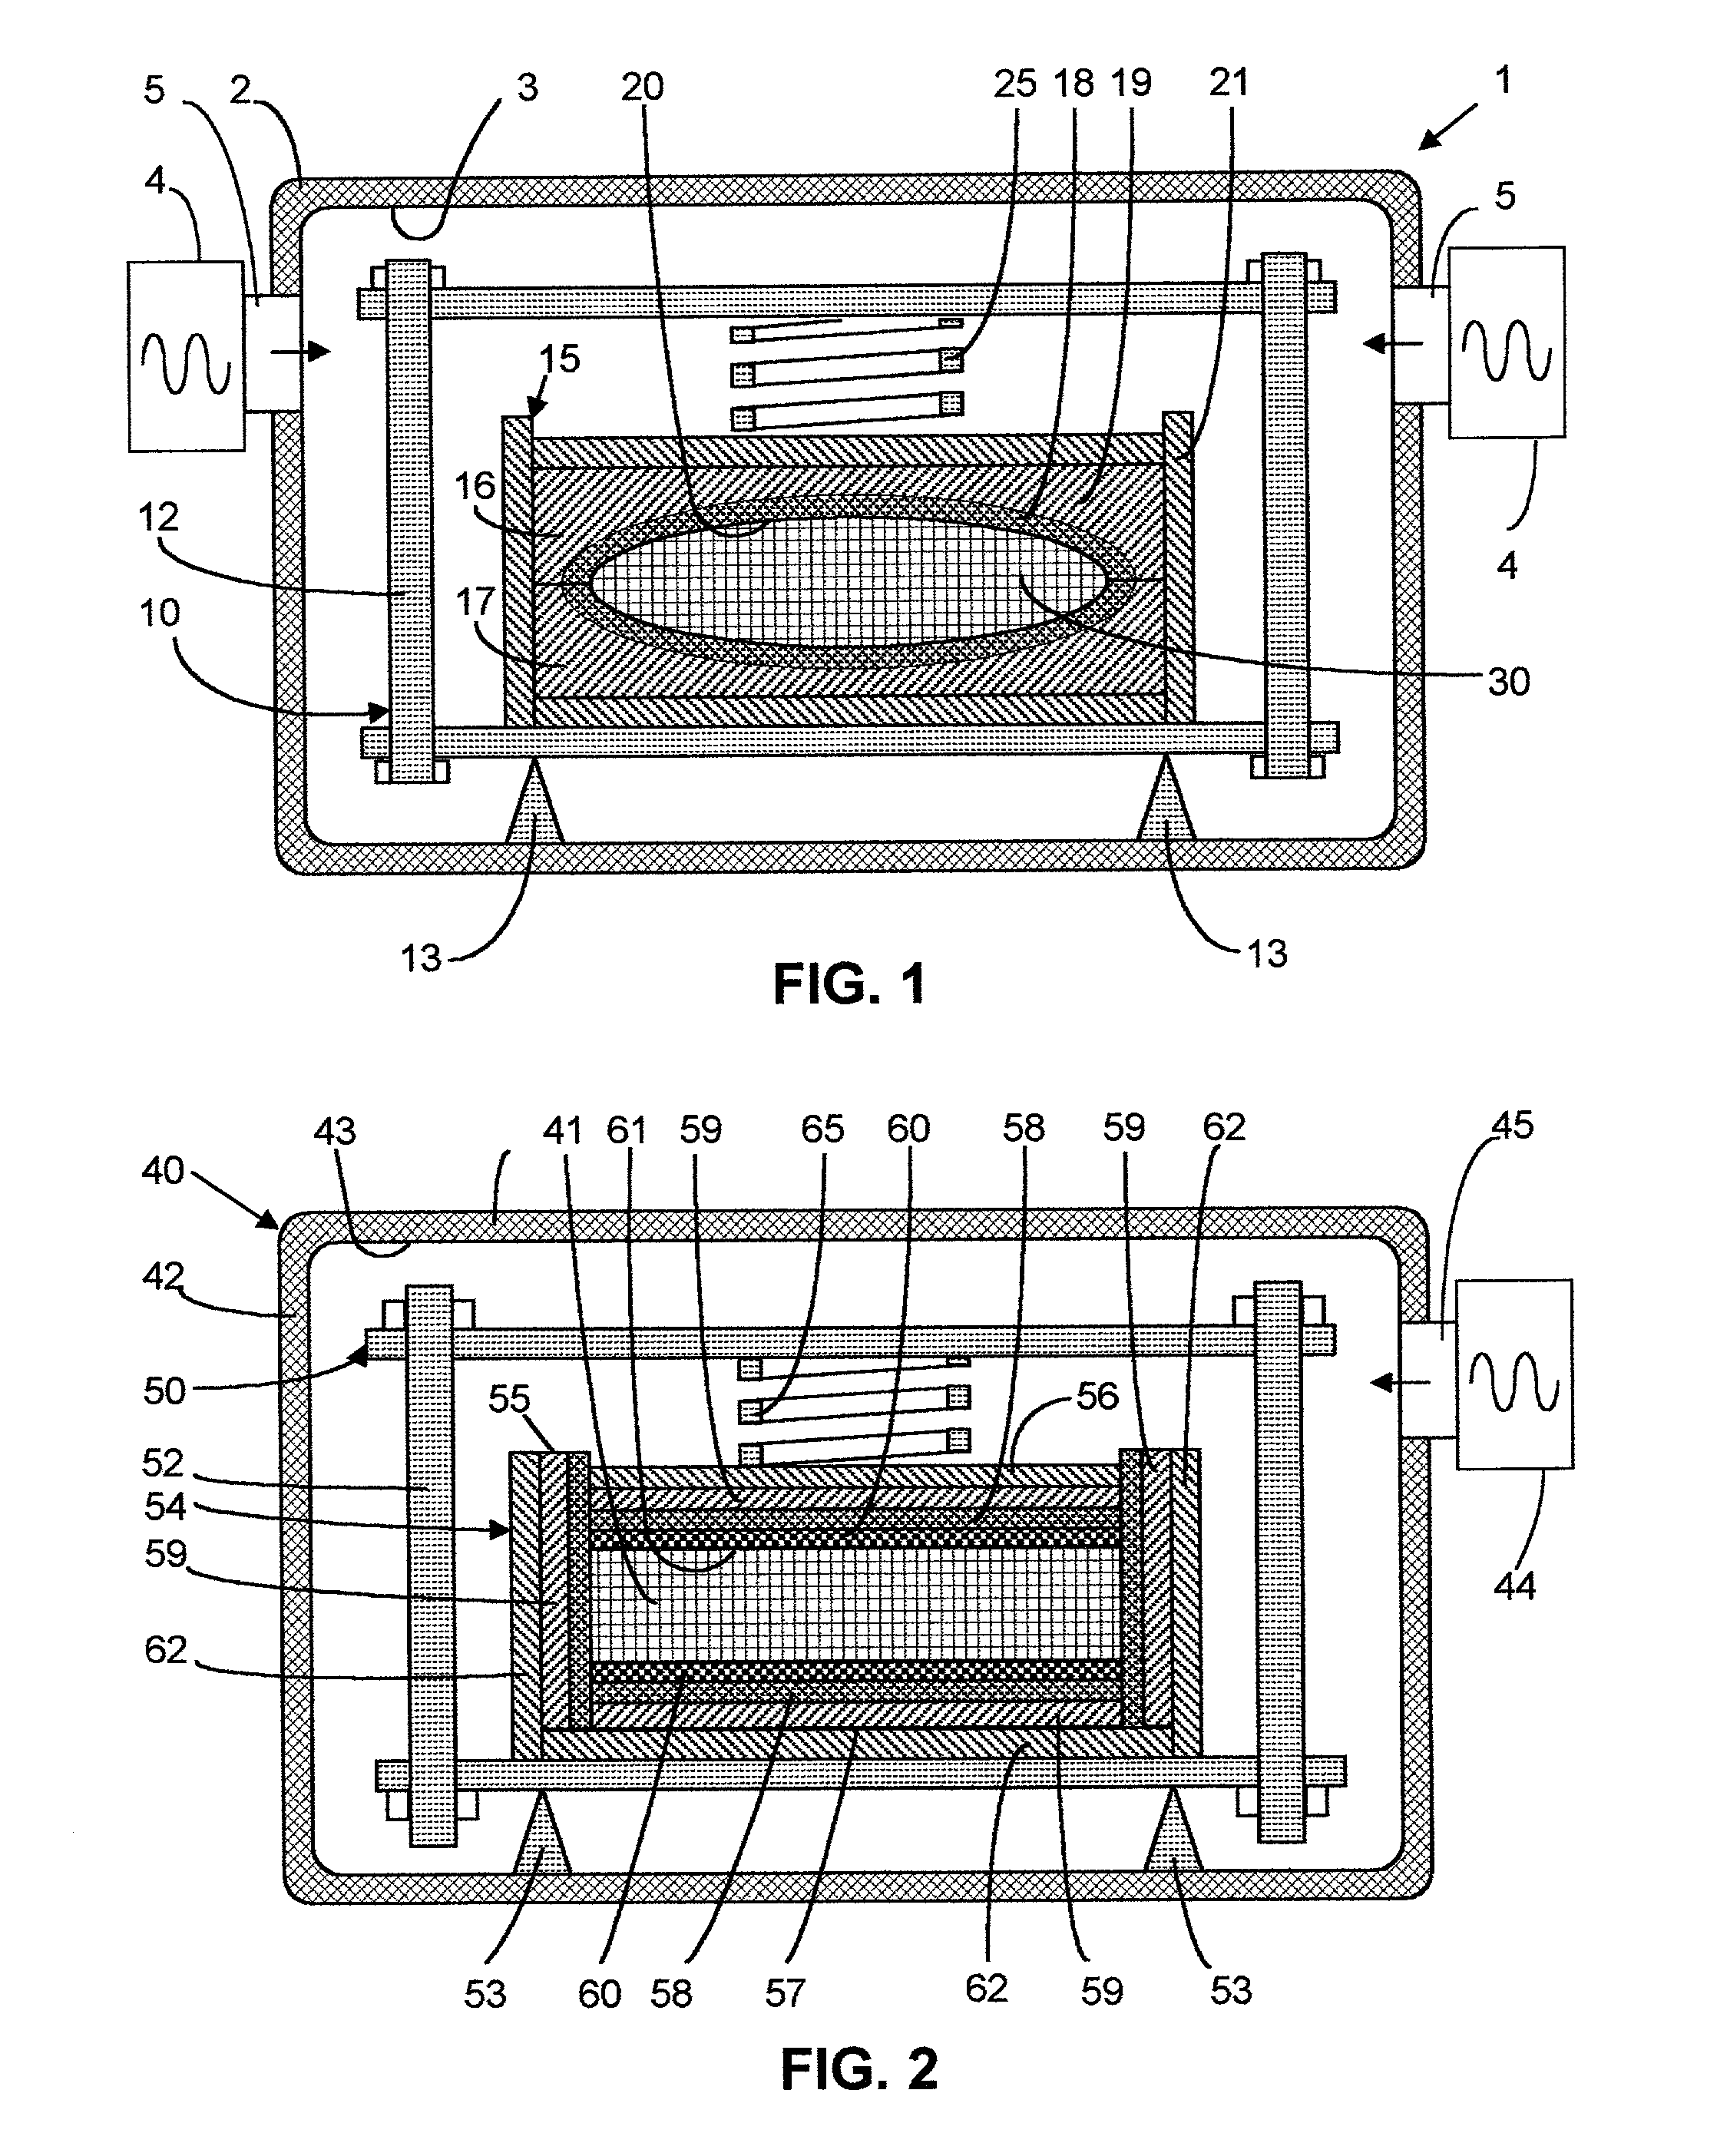 Dielectric mold for uniform heating and molding of polymers and composites in microwave ovens